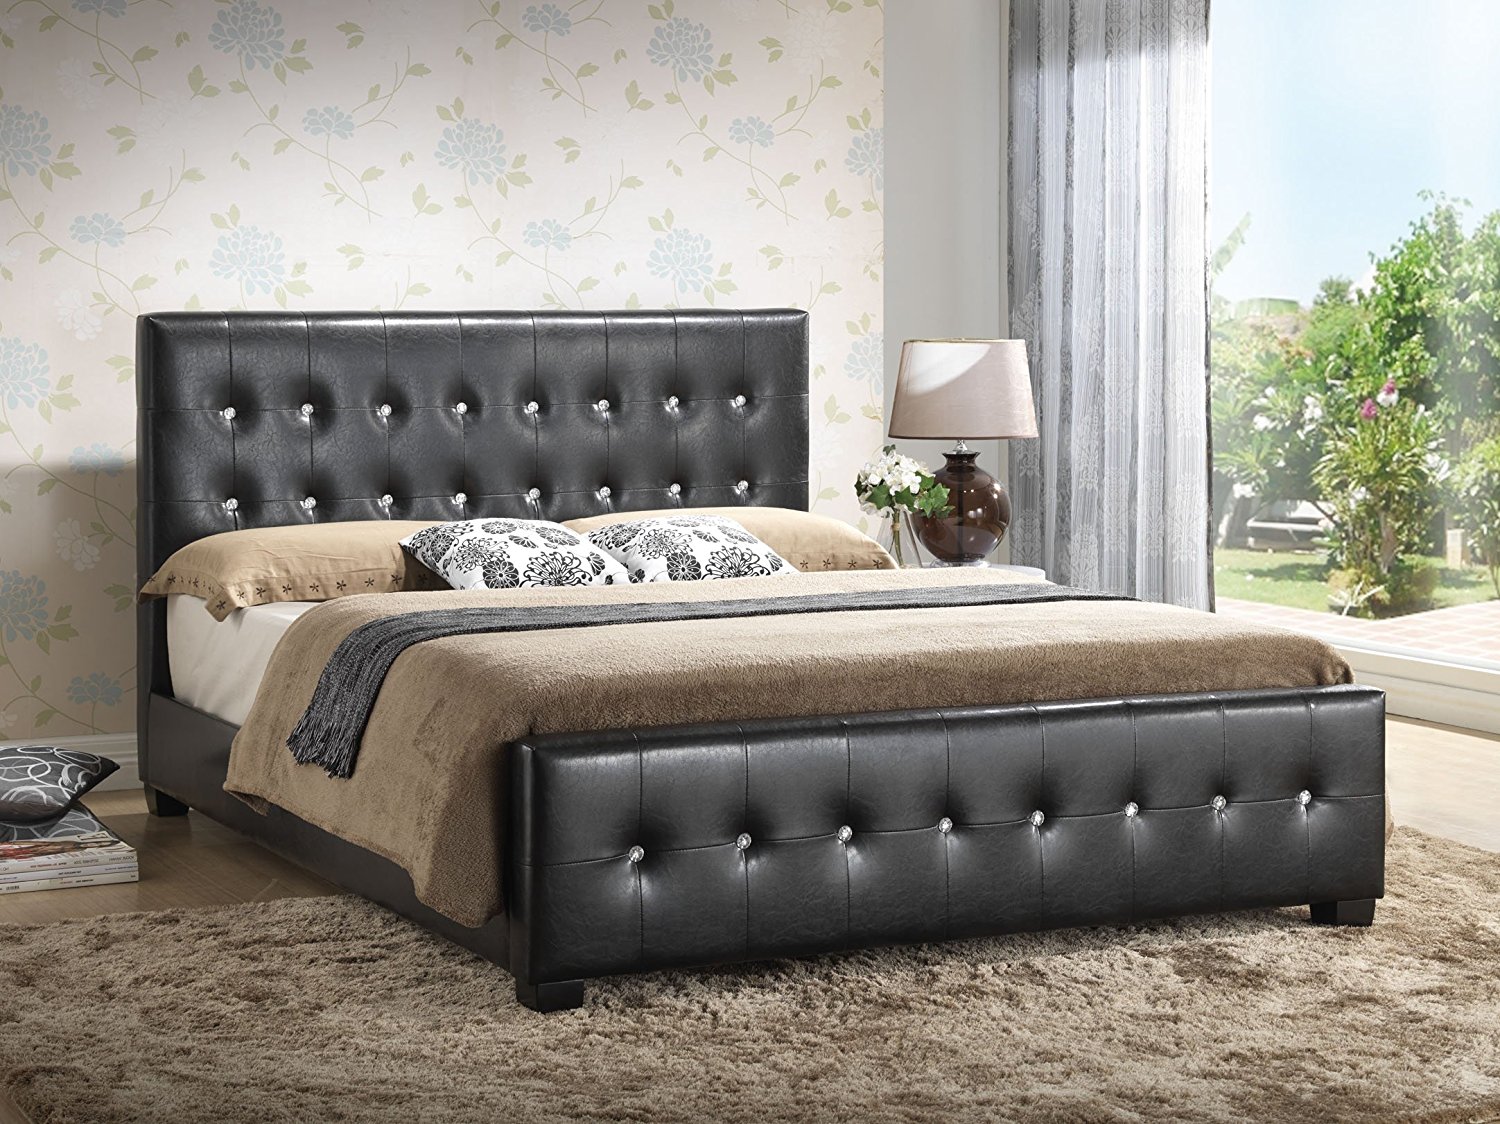 Faux Leather Upholstered Bed, Black Leather Tufted Bed